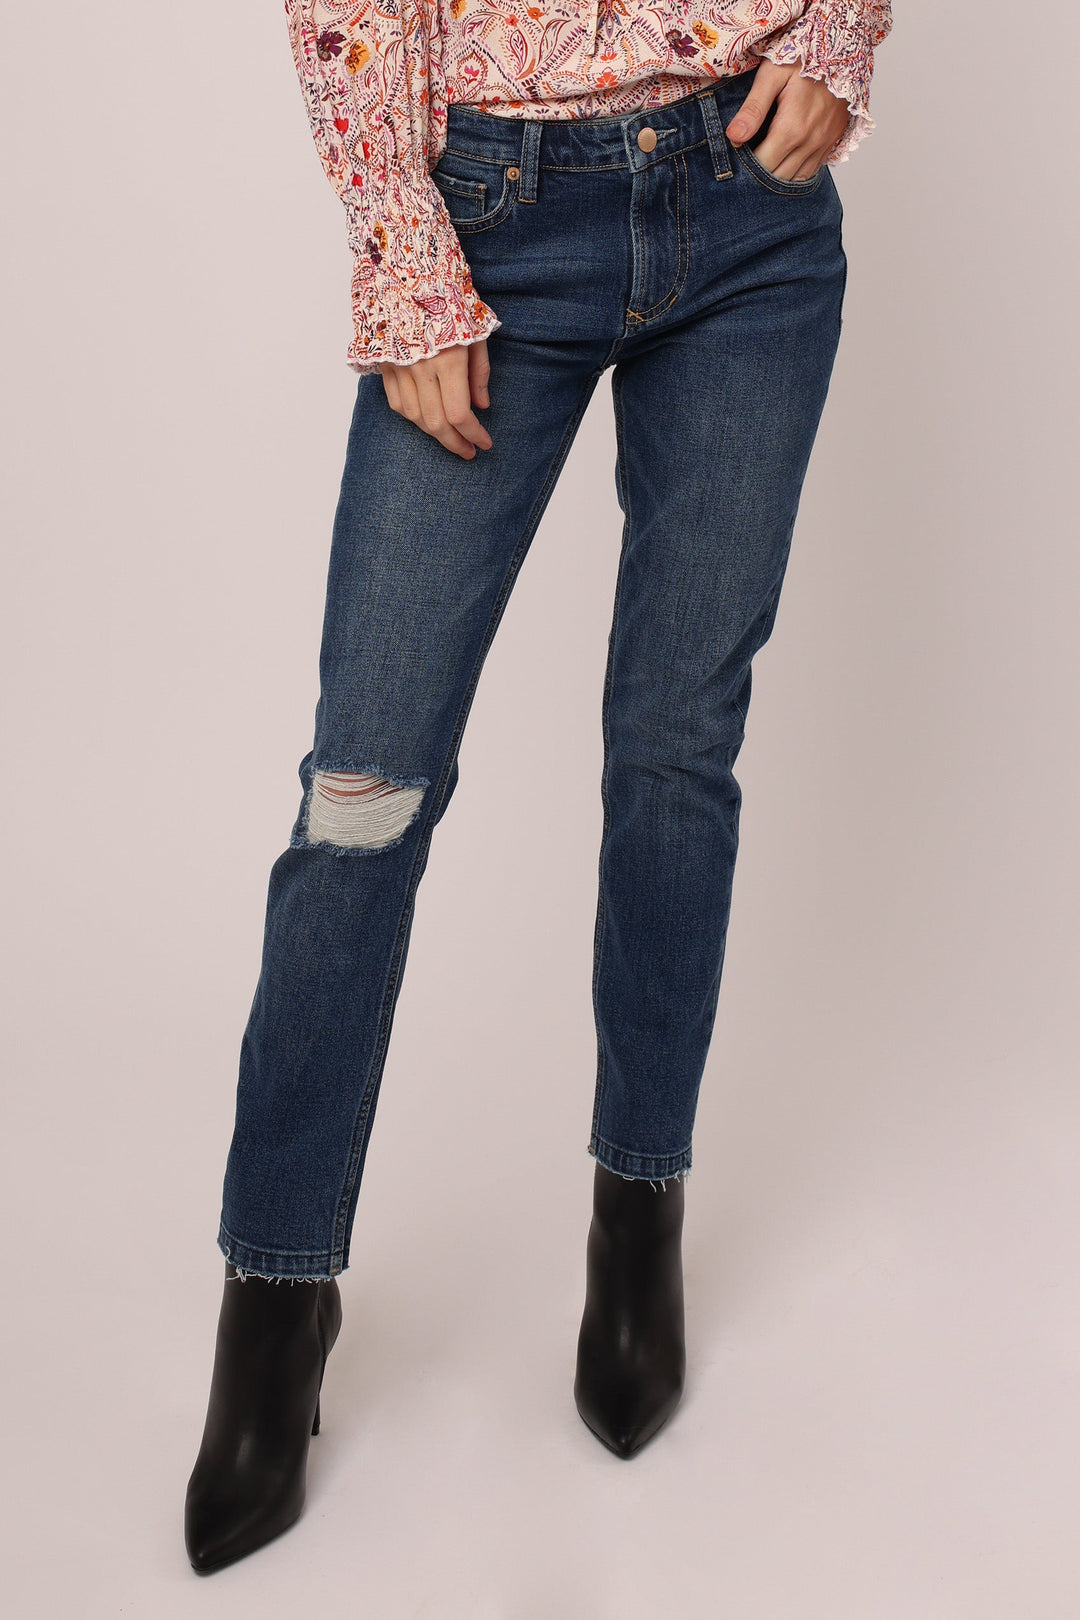 image of a female model wearing a AIDEN HIGH RISE GIRLFRIEND JEANS ADVANCE JEANS